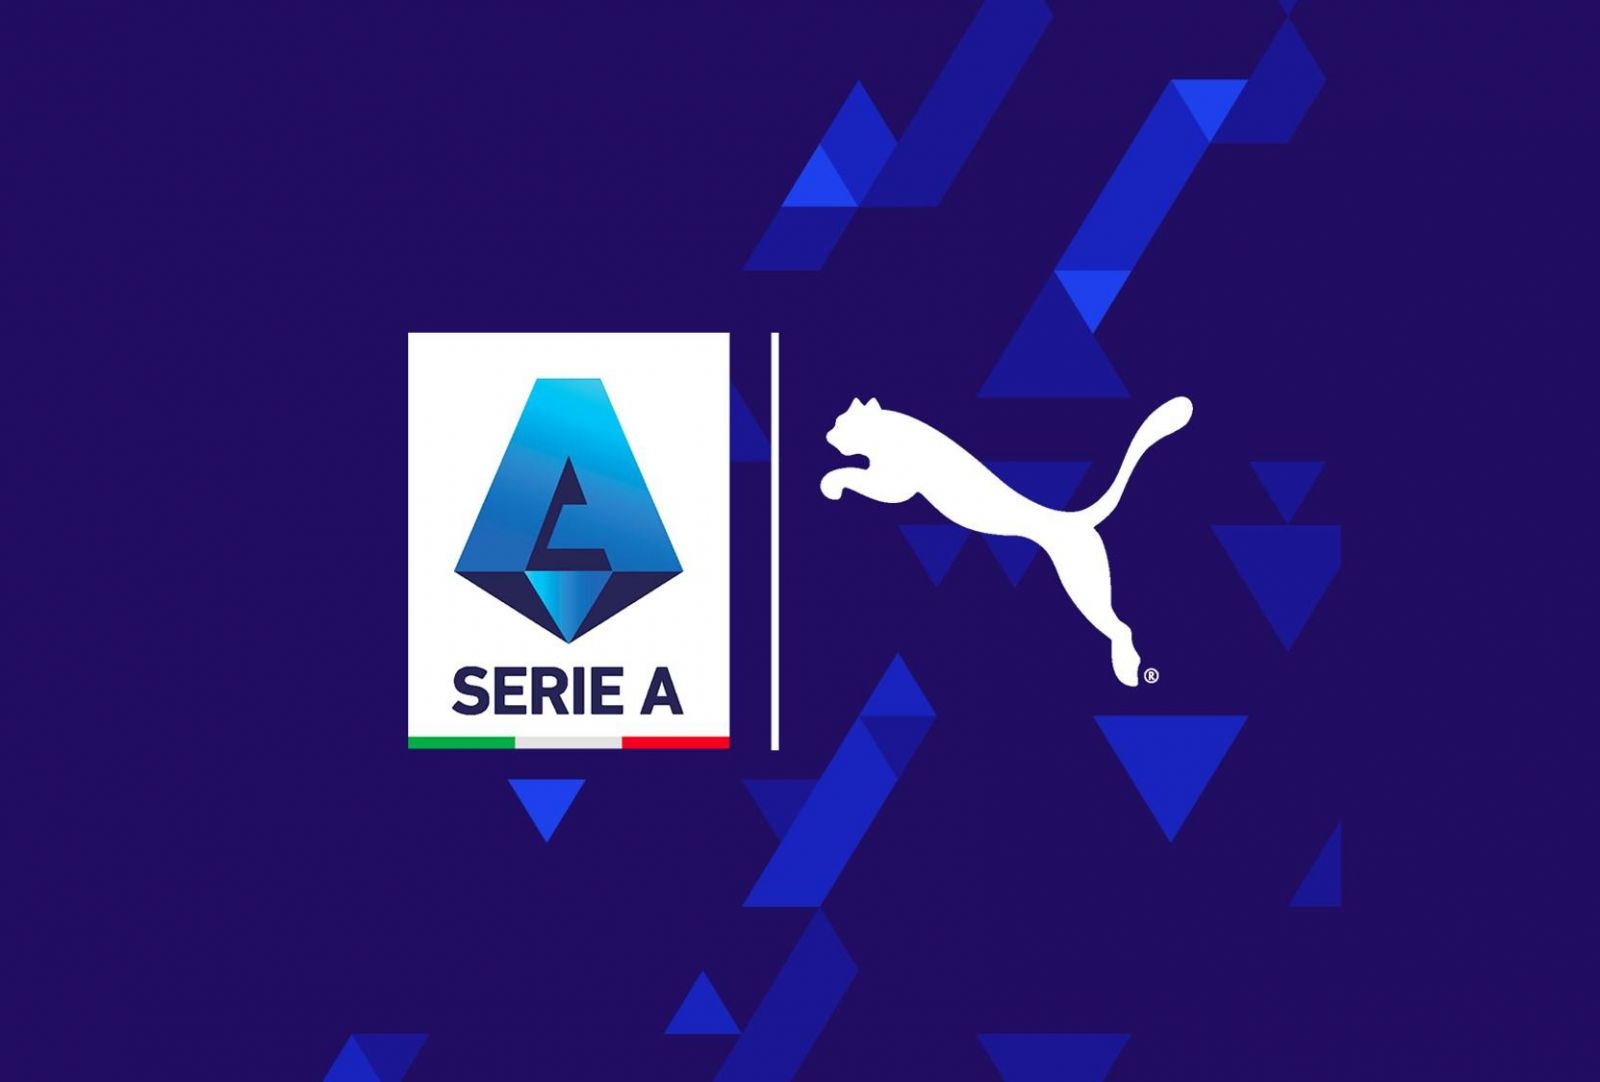 Serie A ended its historical partnership with technical sponsor Nike and entered a new deal with PUMA effective next season